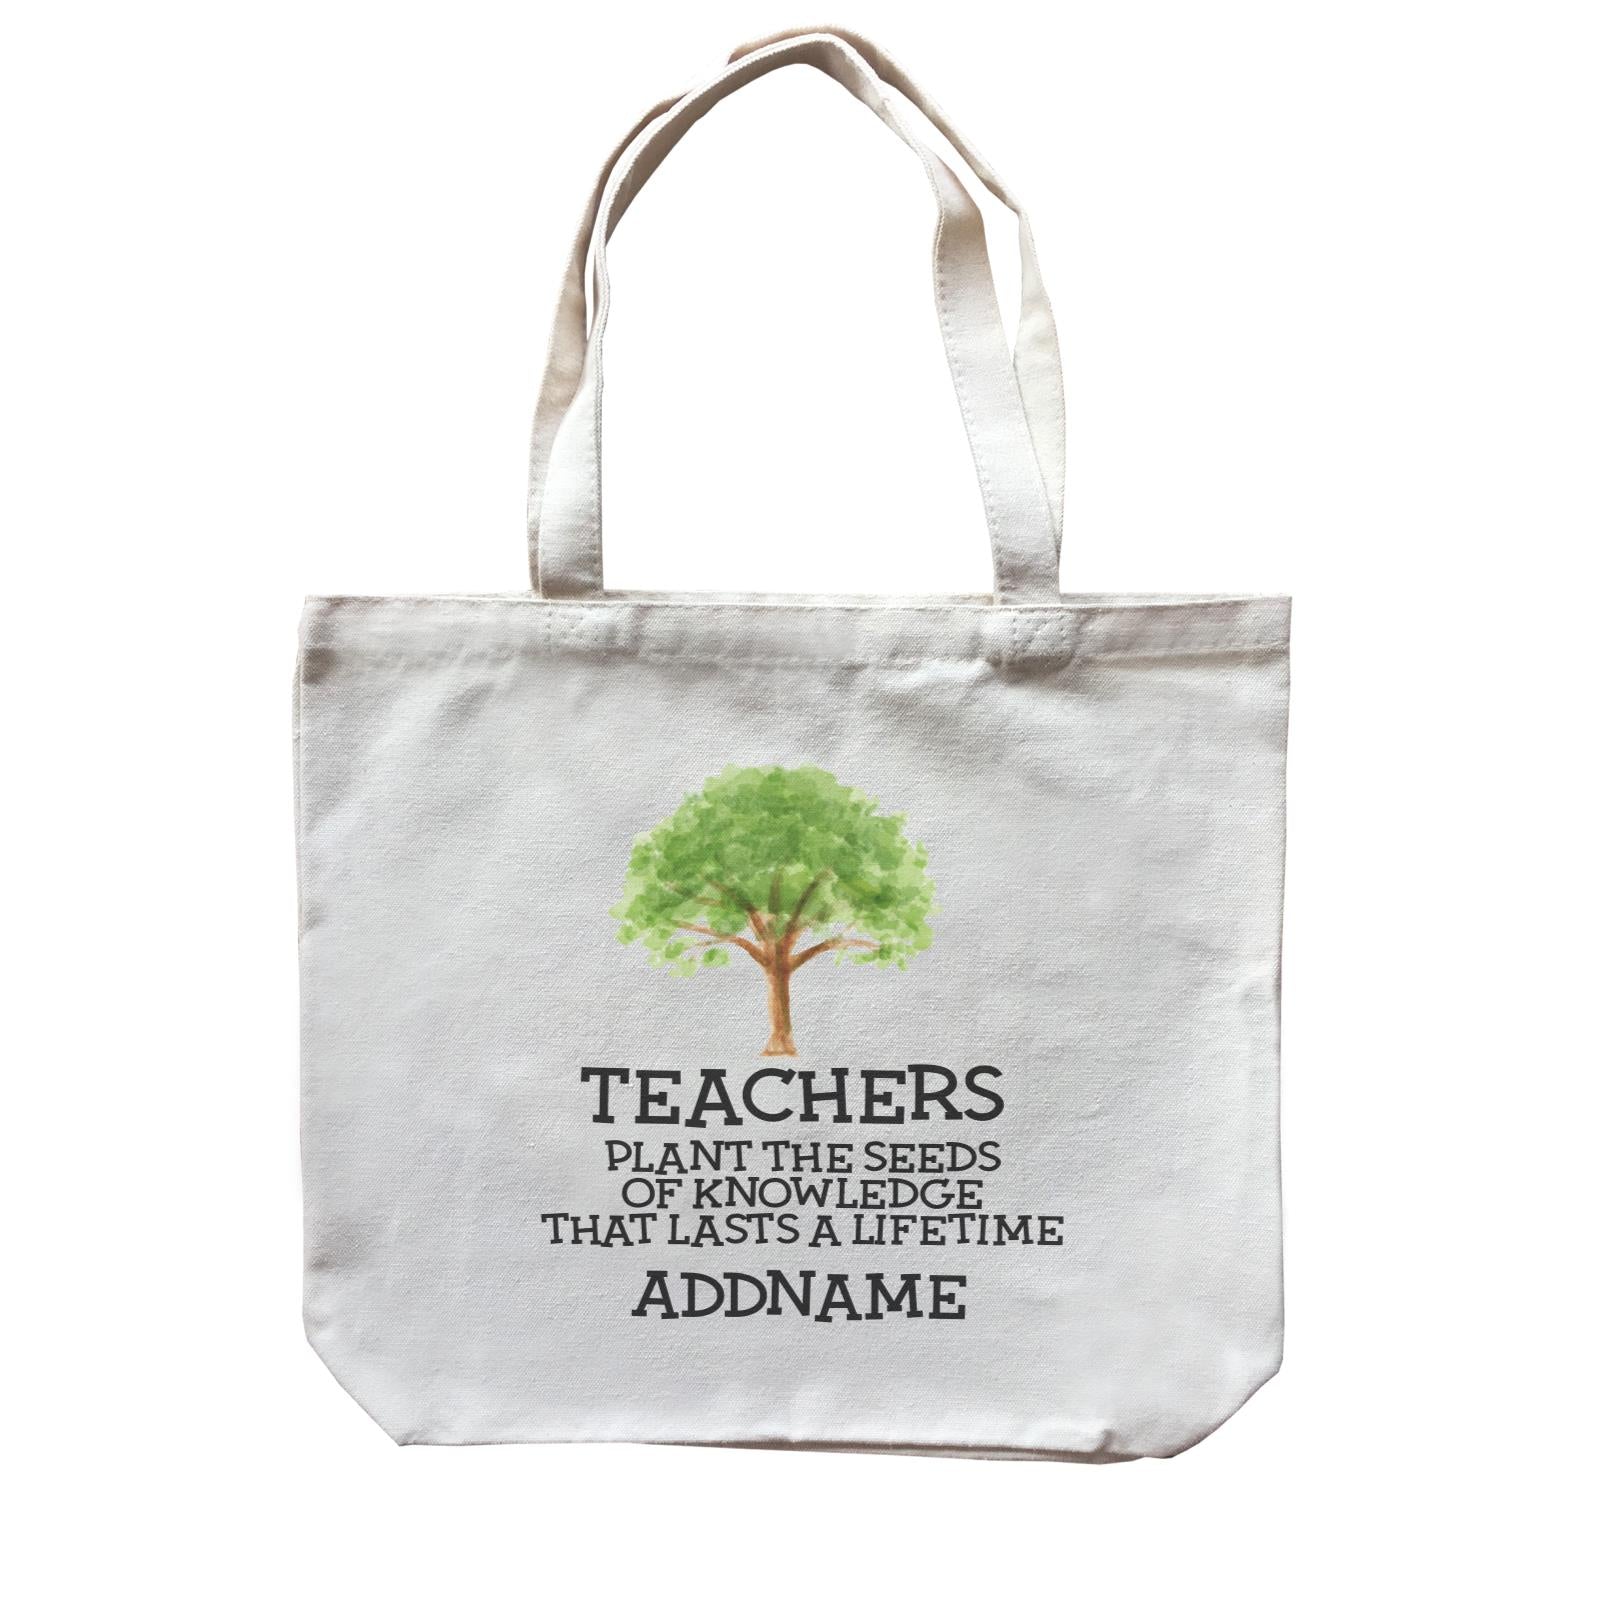 Teacher Quotes 2 Teachers Plant The Seeds Of Knowledge That Lasts A Lifetime Addname Canvas Bag